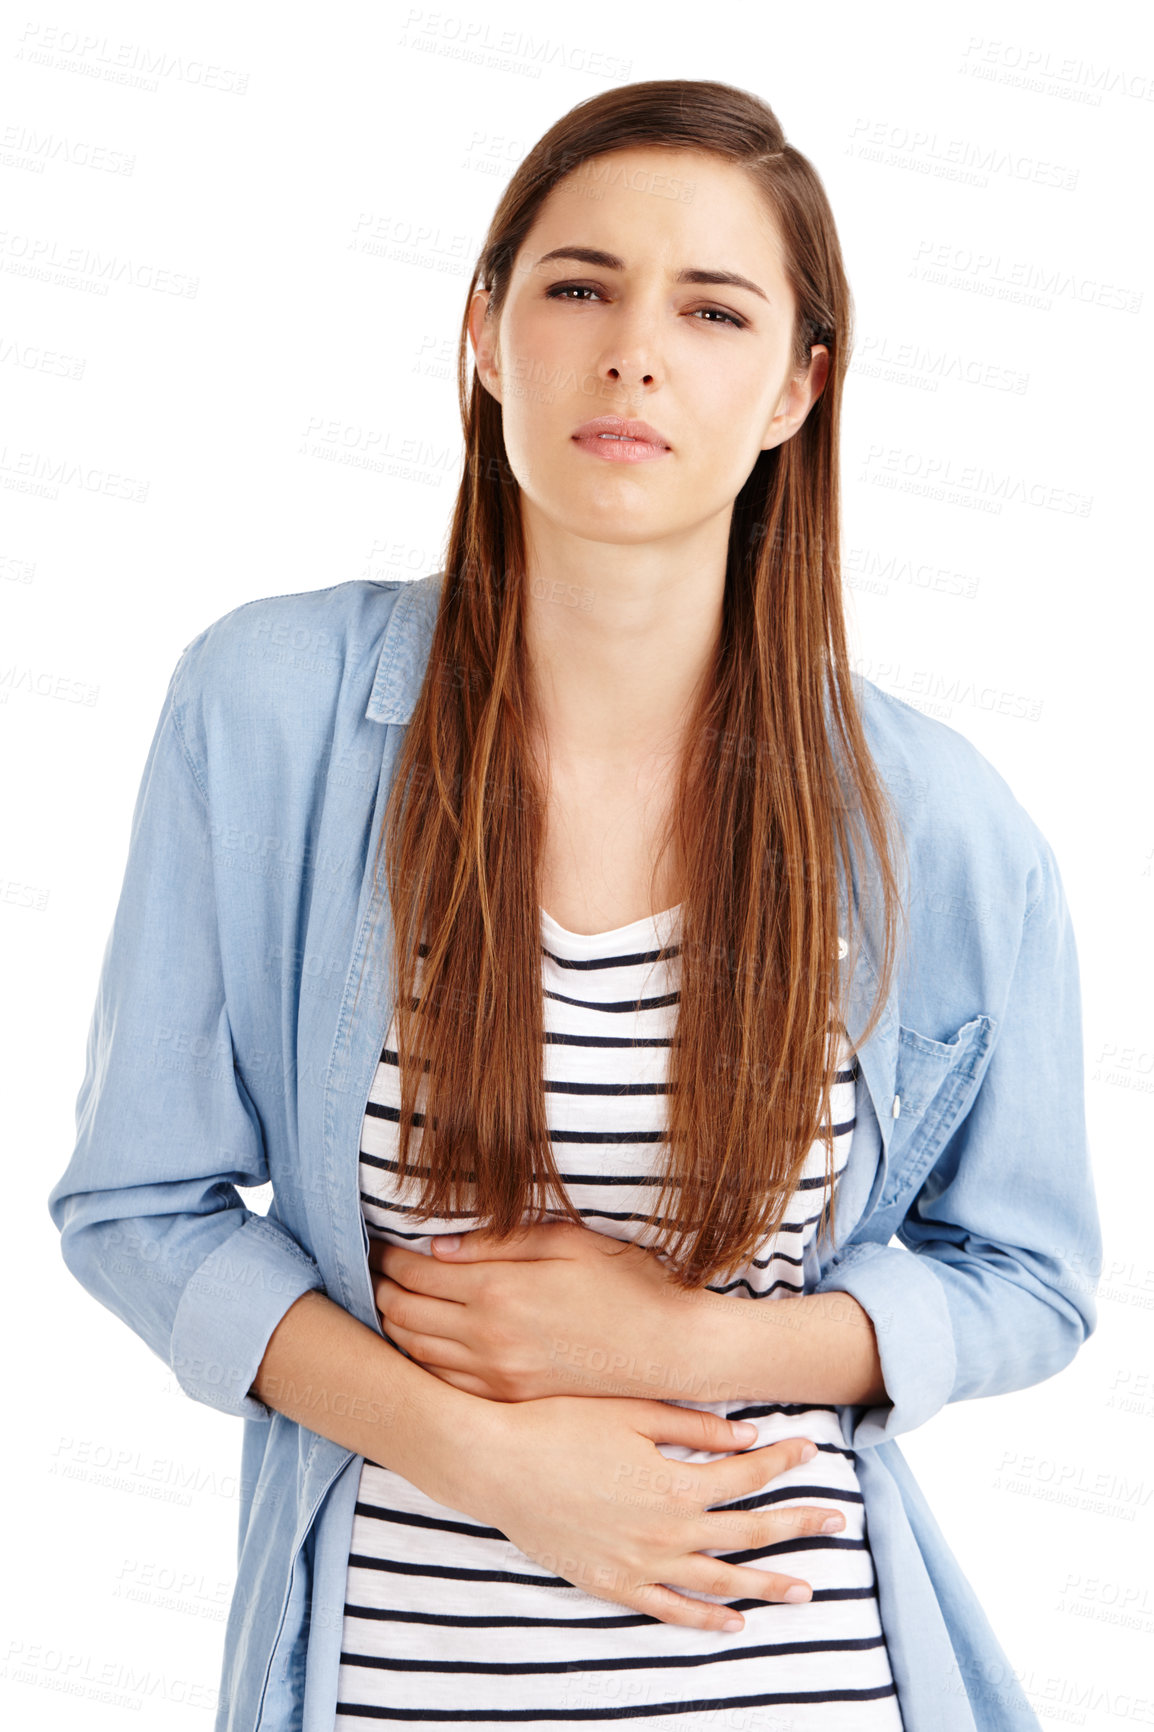 Buy stock photo Studio shot of an attractive young woman suffering from abdominal pain against a white background